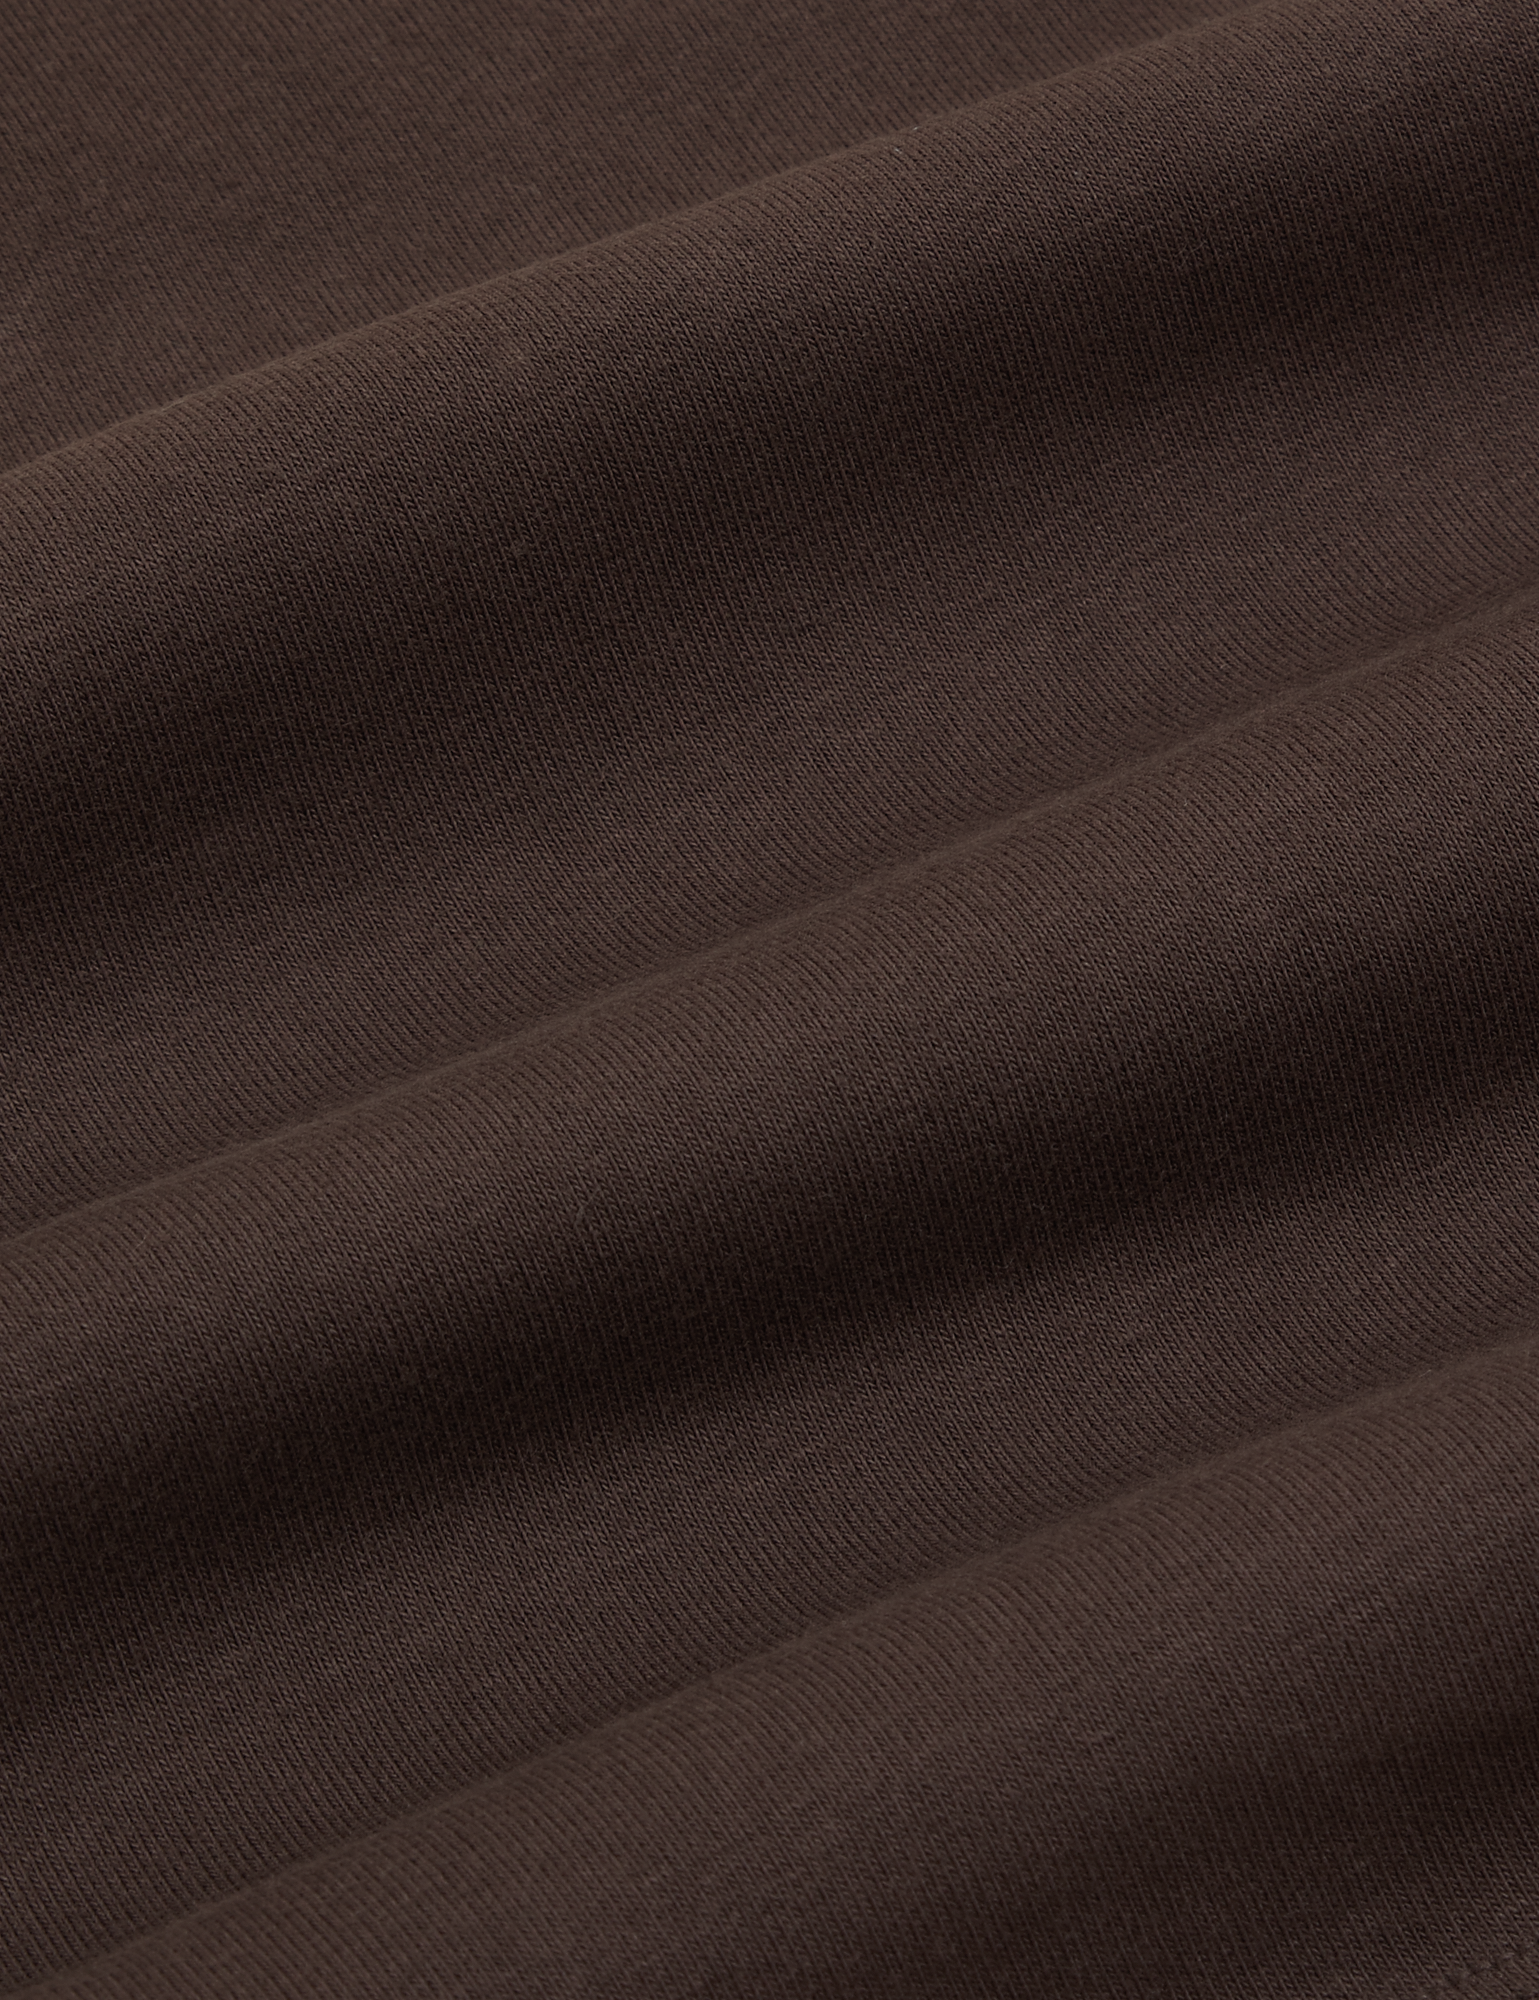 Racerback Tank in Espresso Brown fabric detail close up